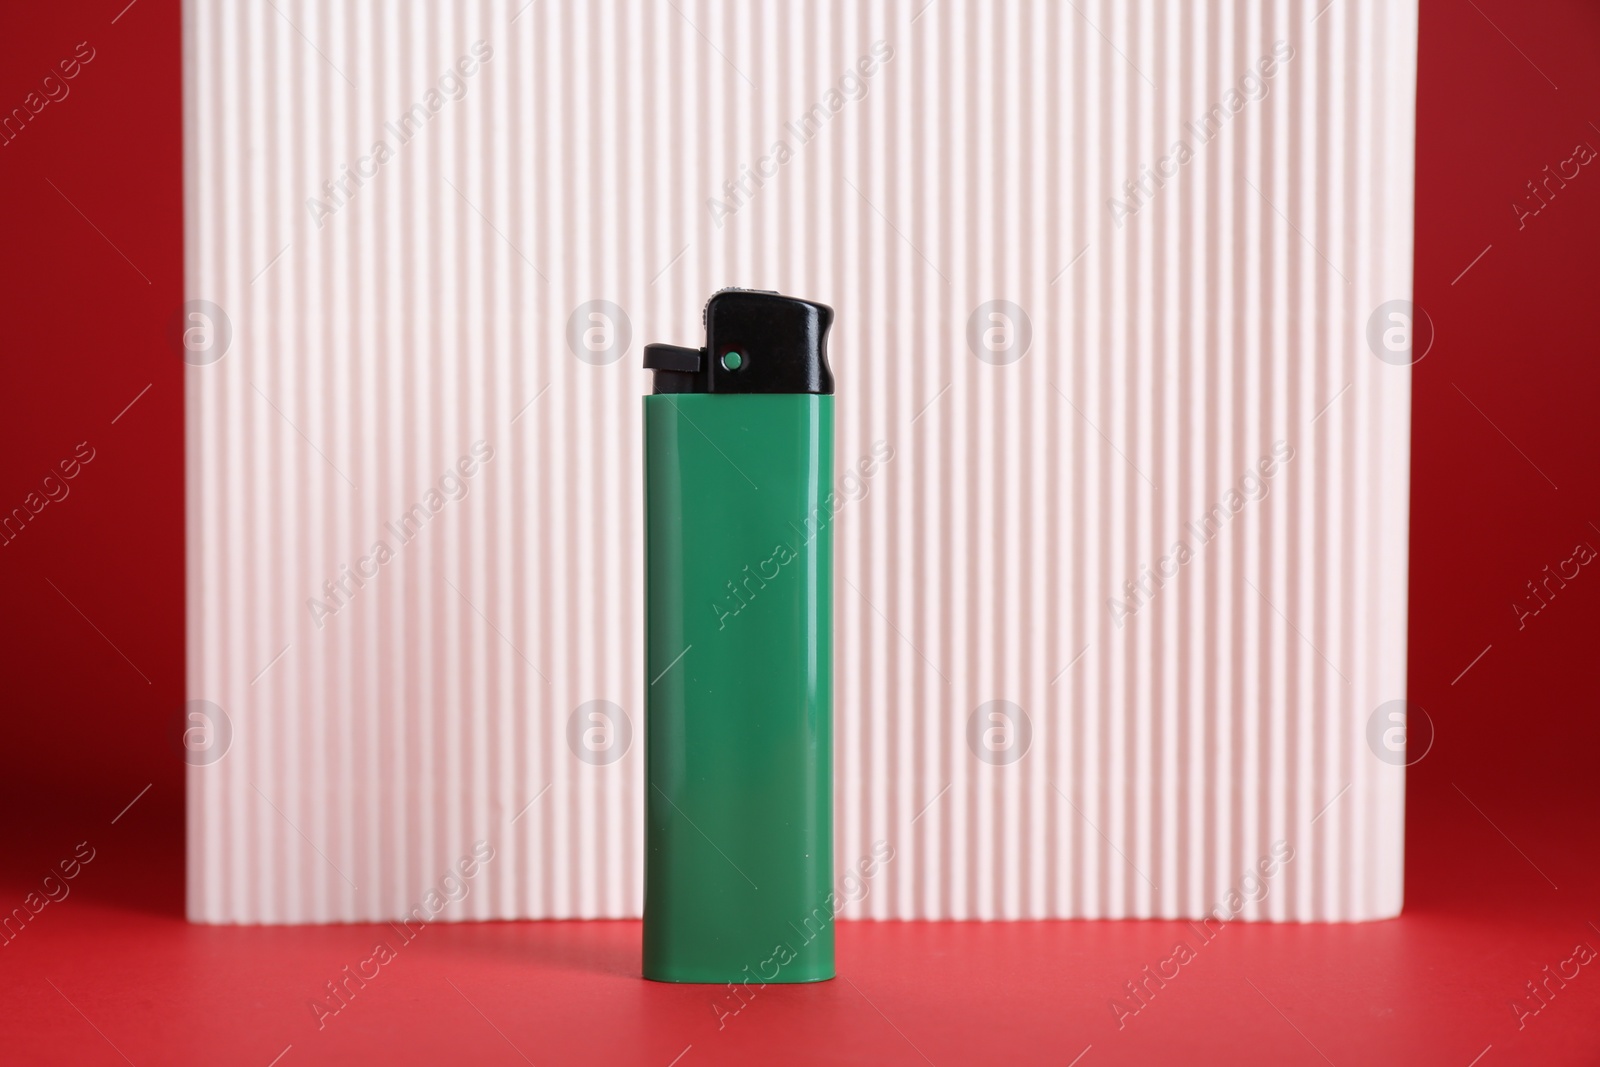 Photo of Stylish small pocket lighter and white corrugated fiberboard on red background